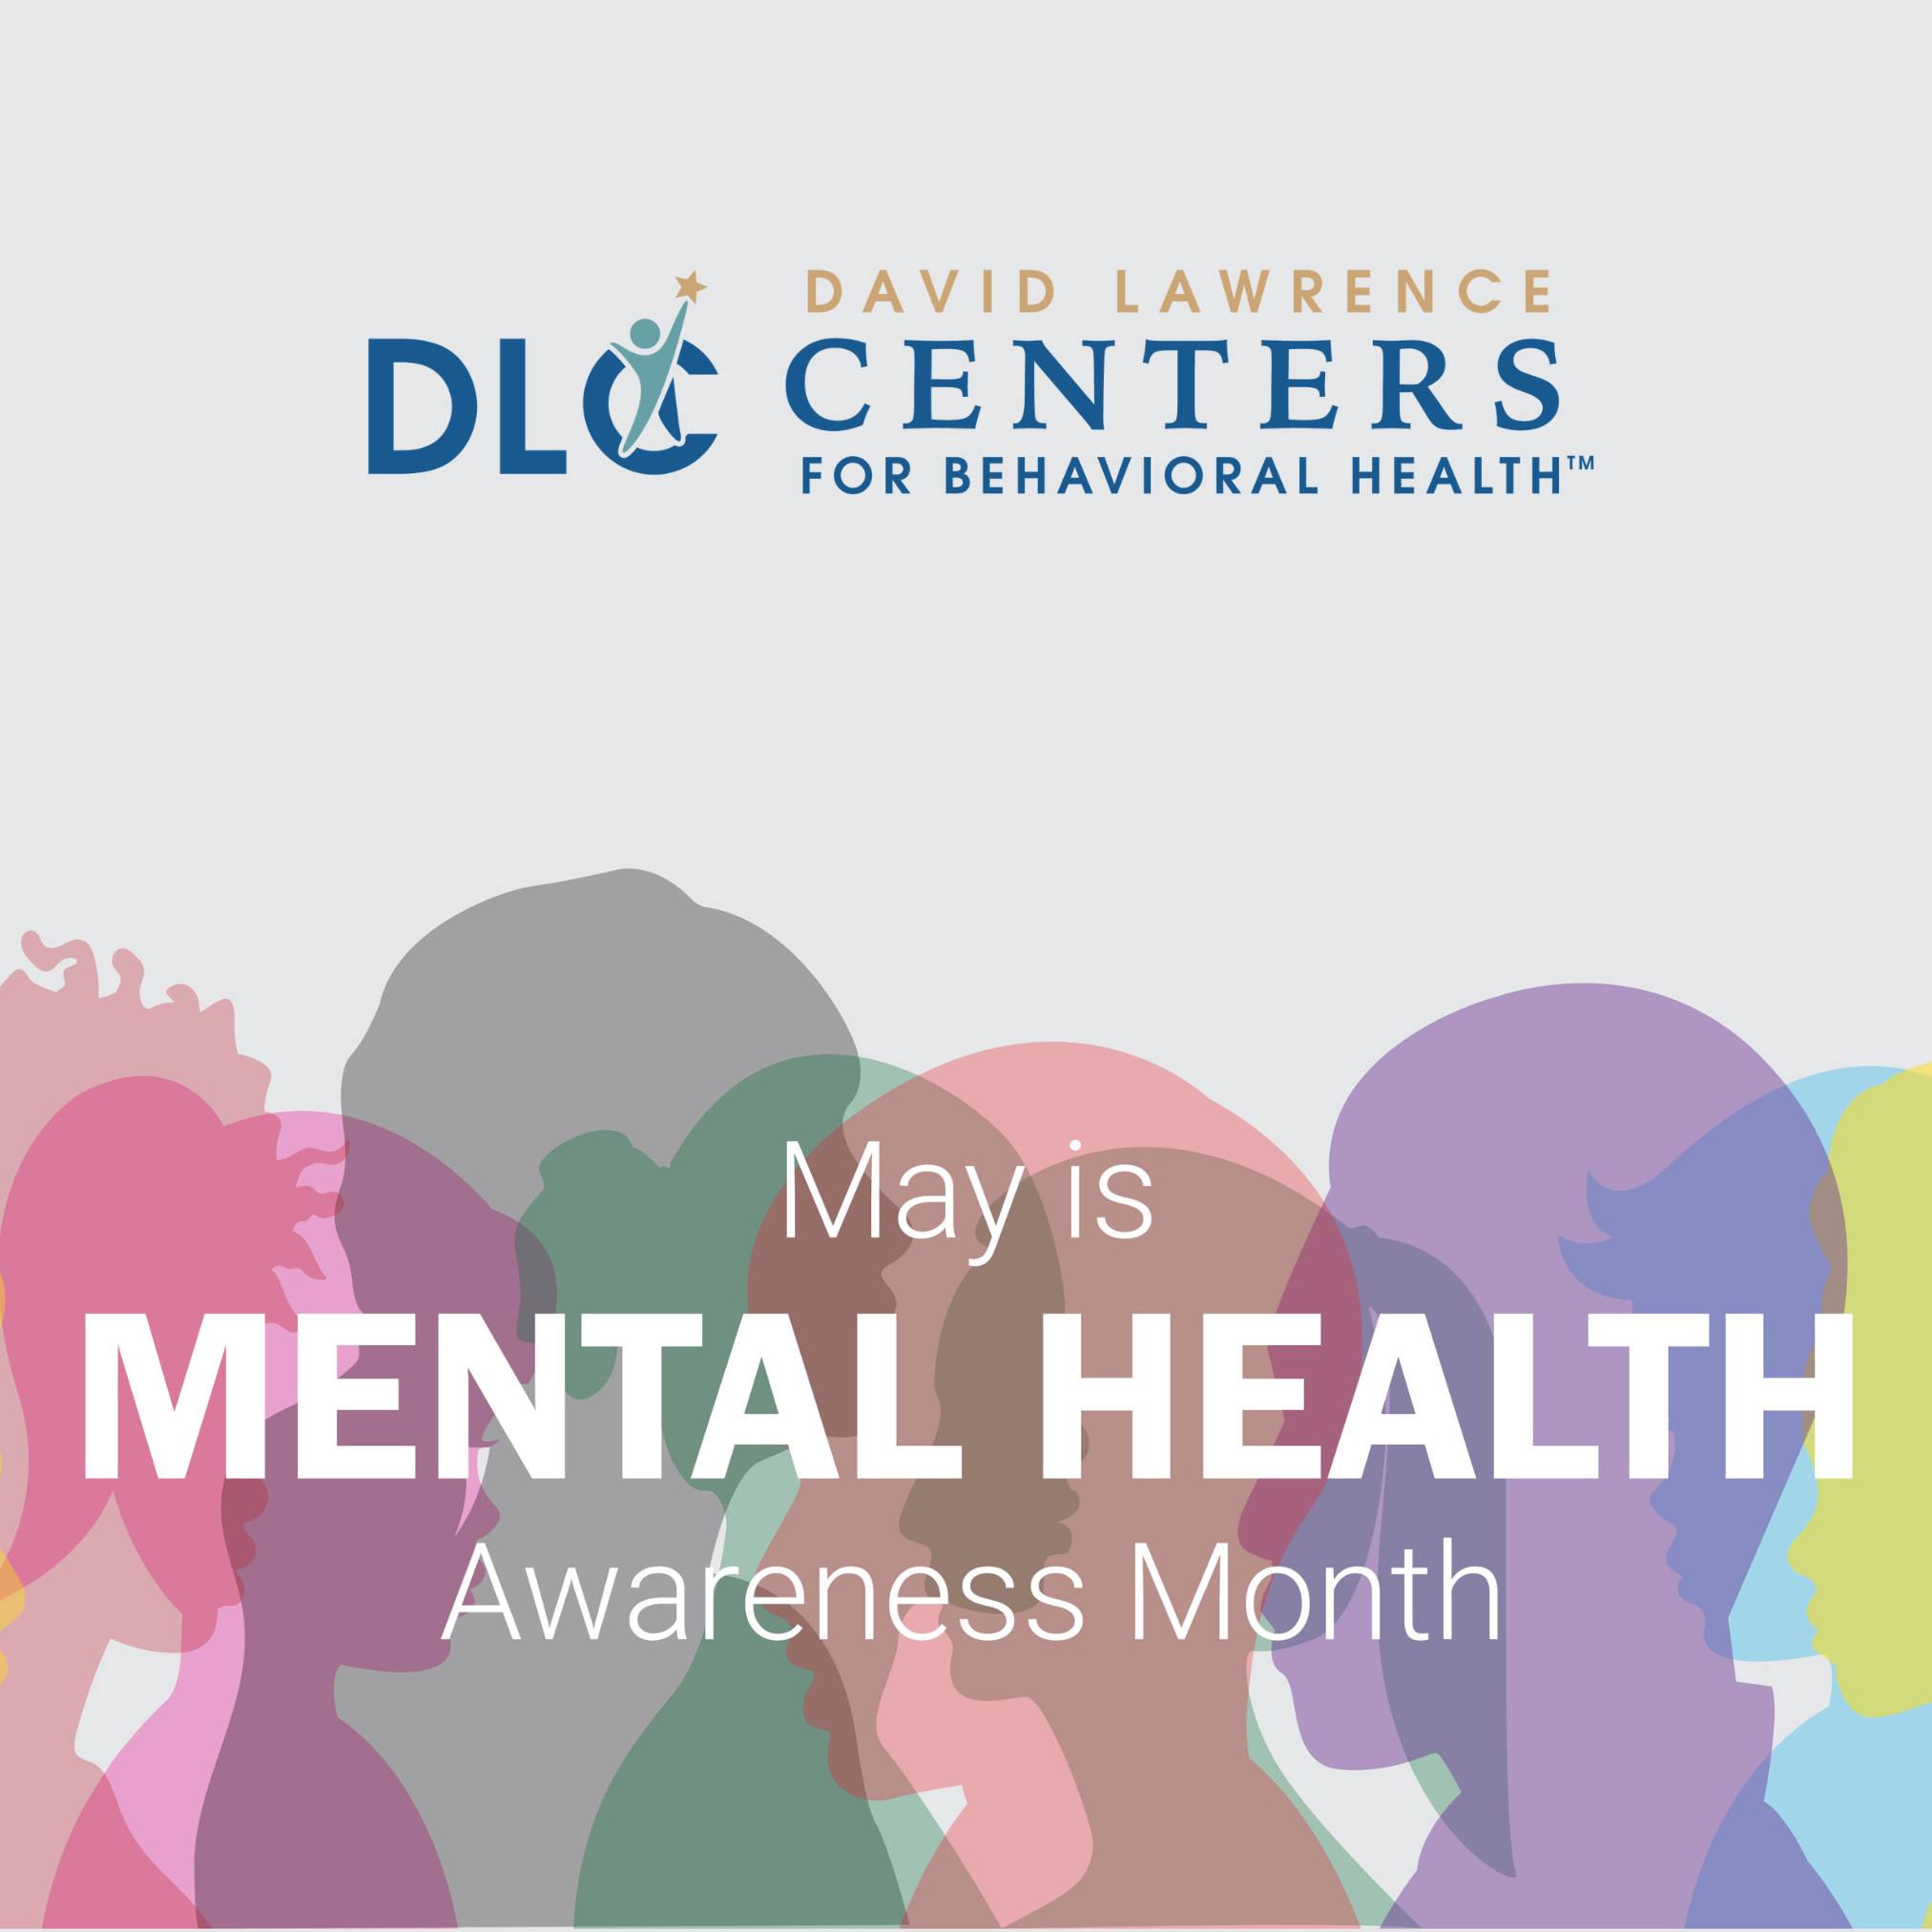 image 1 David Lawrence Centers hosts educational opportunities throughout May in recognition of Mental Health Awareness Month